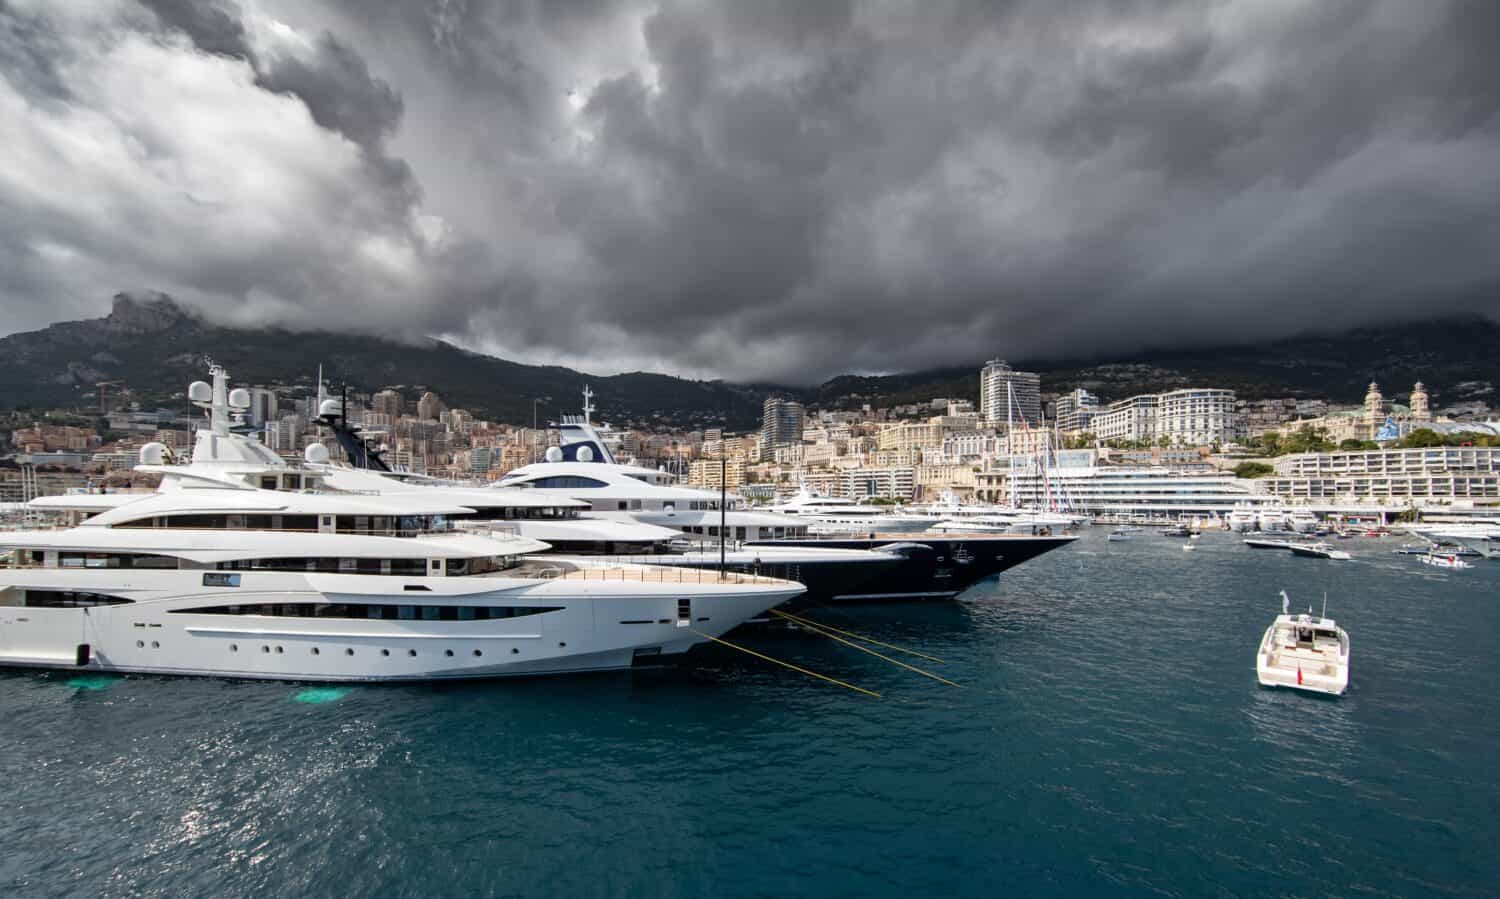 A lot of huge yachts are in port of Monaco at storm weather, mountain is on background, glossy board of the motor boat, megayachts are moored in marina, sun reflection on glossy board